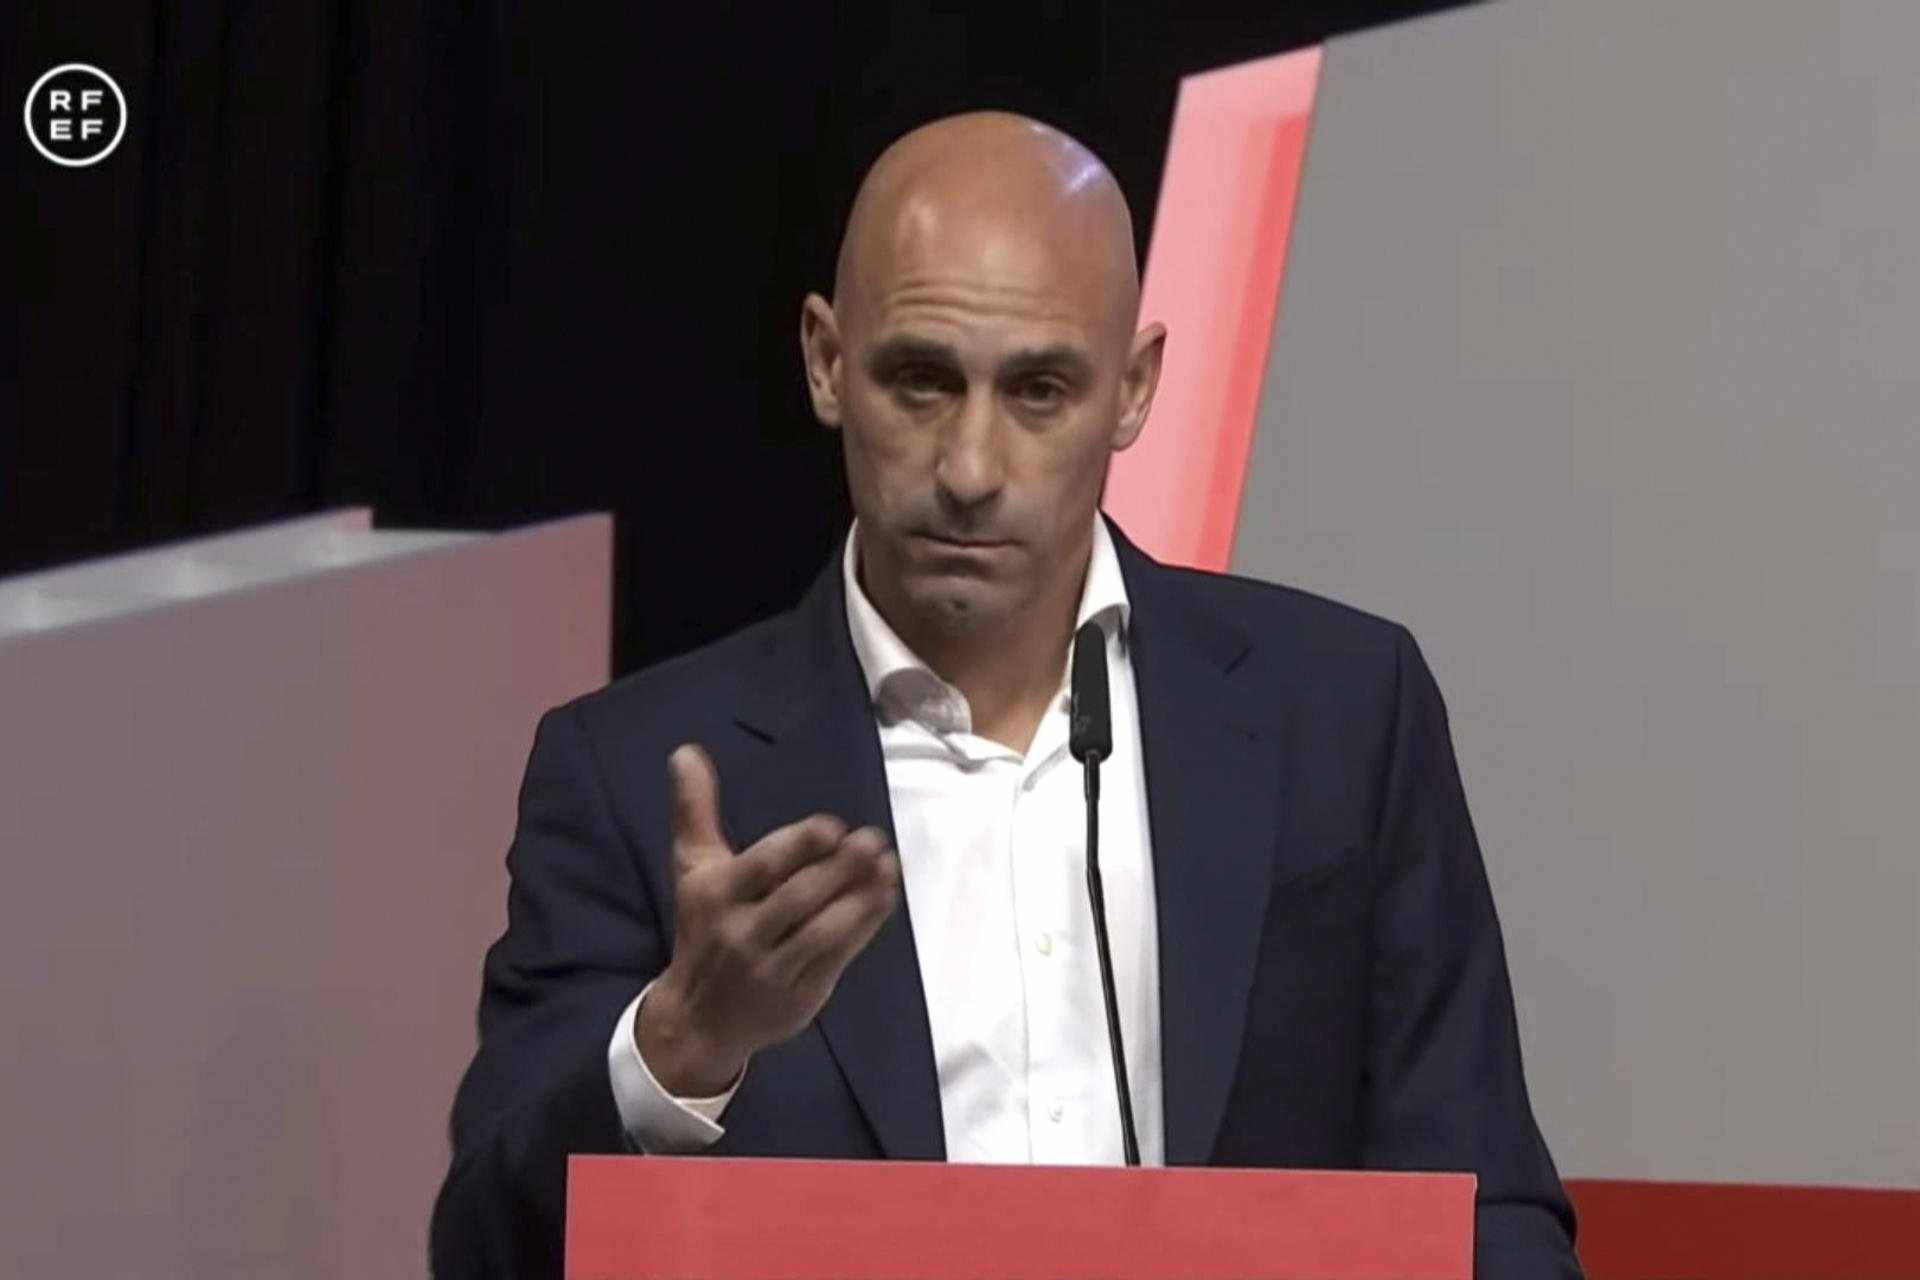 Rubiales clings to his post at RFEF meeting and refuses to resign as head of Spanish football